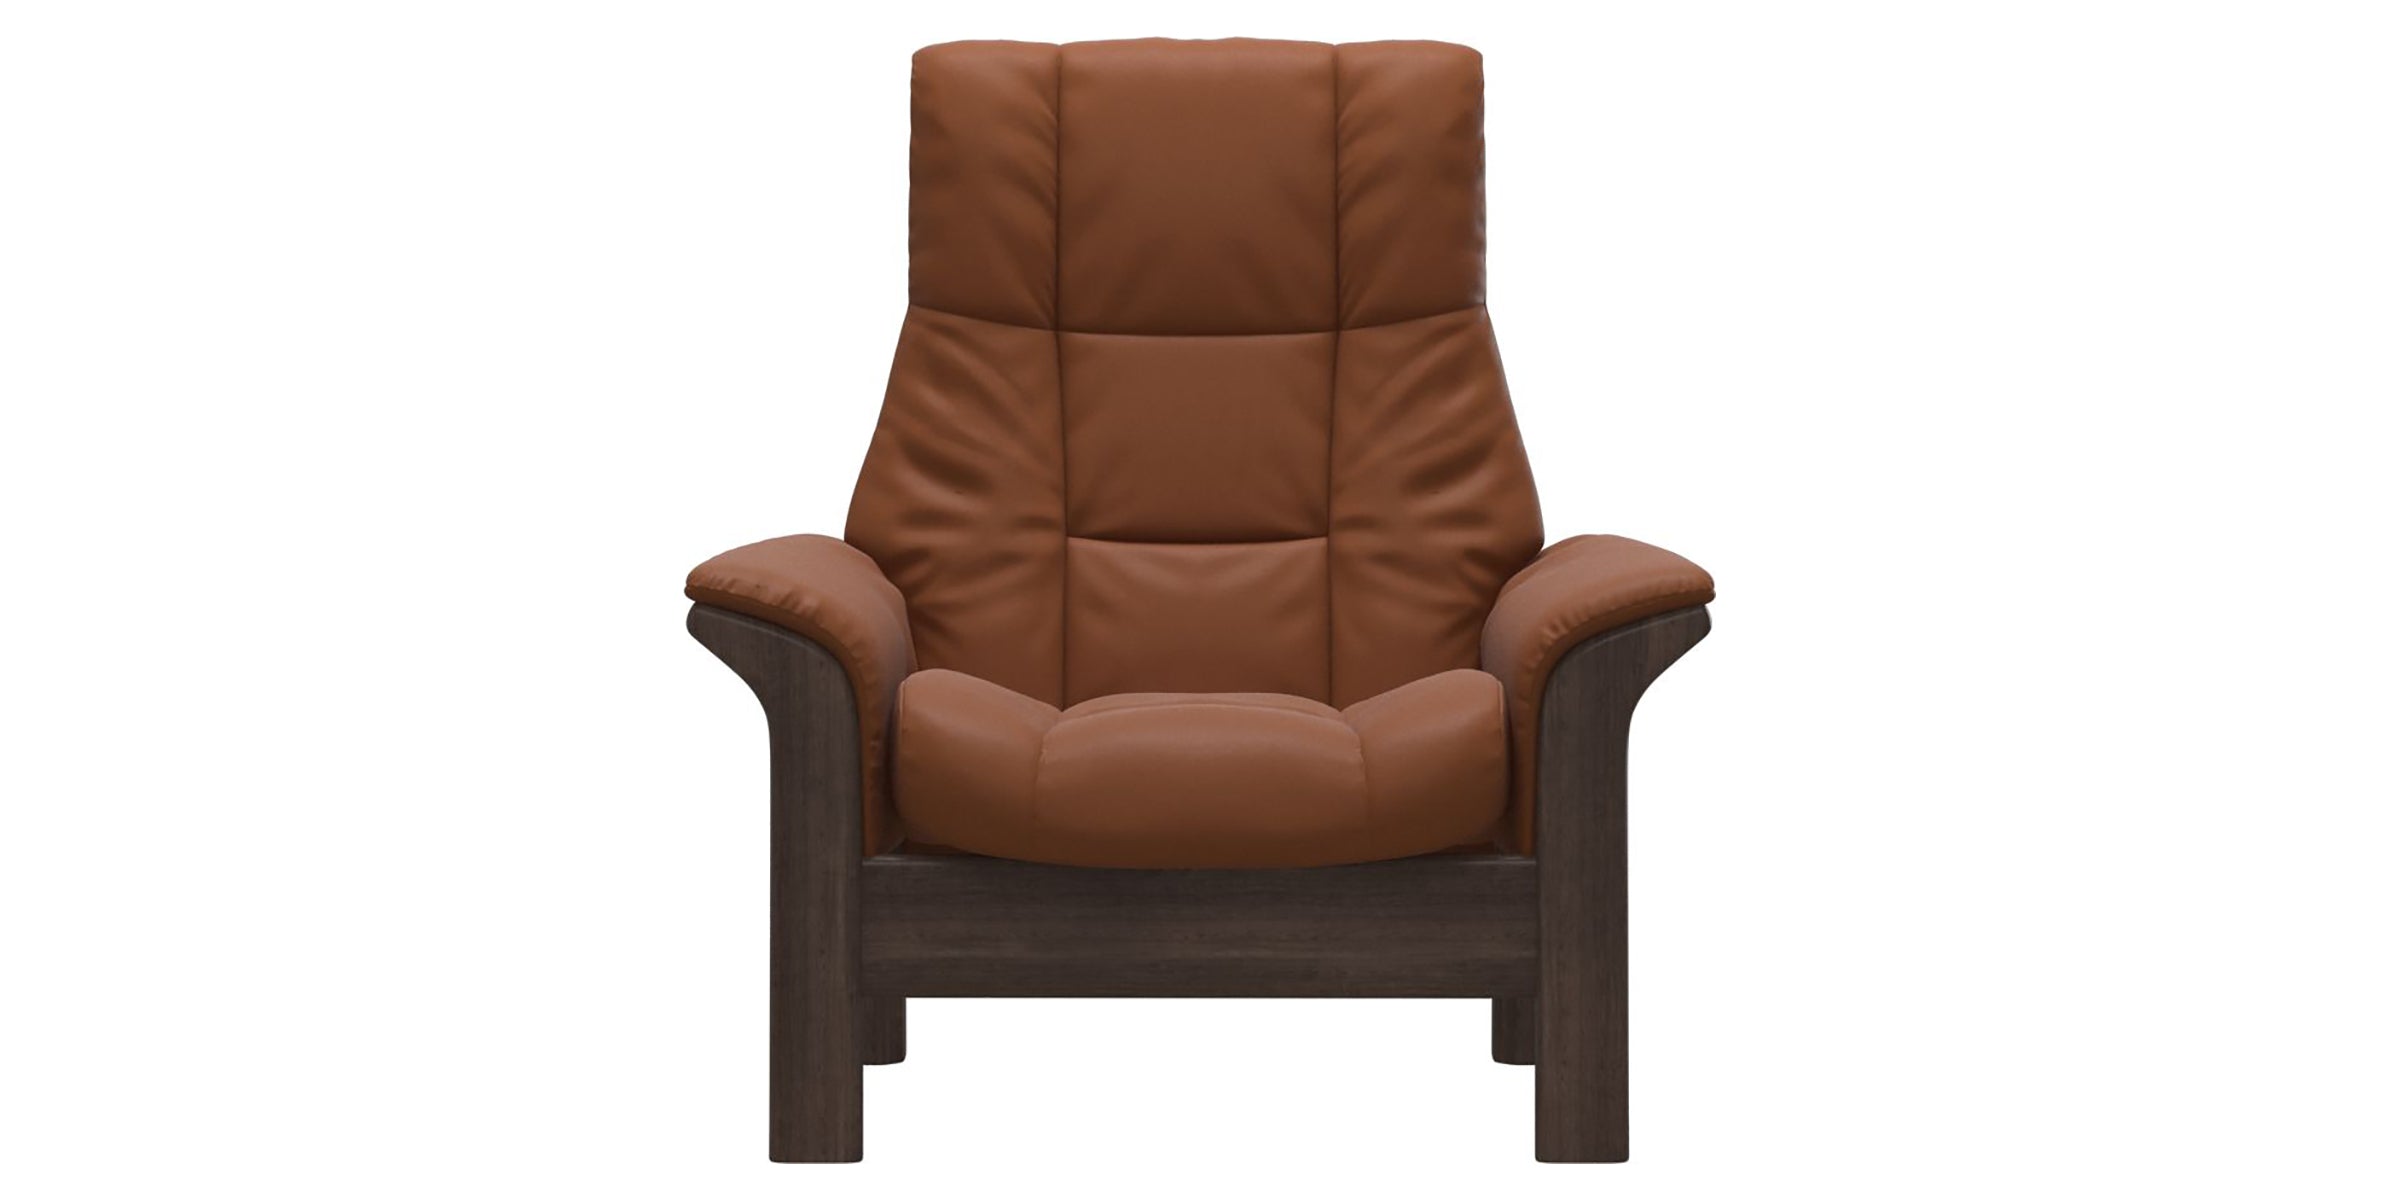 Paloma Leather New Cognac and Wenge Base | Stressless Windsor High Back Chair | Valley Ridge Furniture